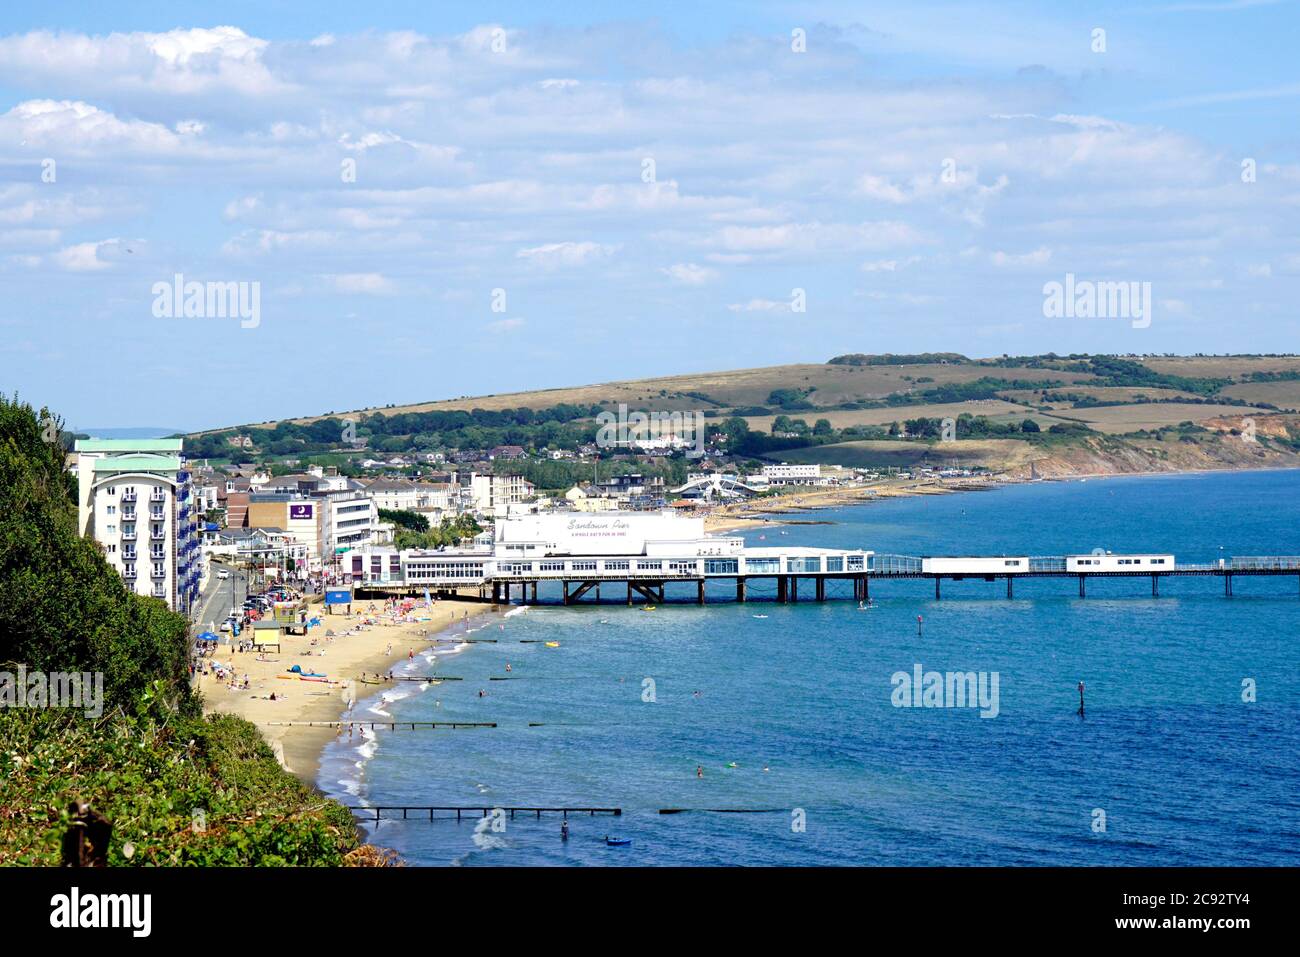 Sandown, Isle of Wight, UK. July 20, 2020. Holidaymakers enjoying the beach and pier in the Summer sunshine taken from the cliff path at Sandown on th Stock Photo